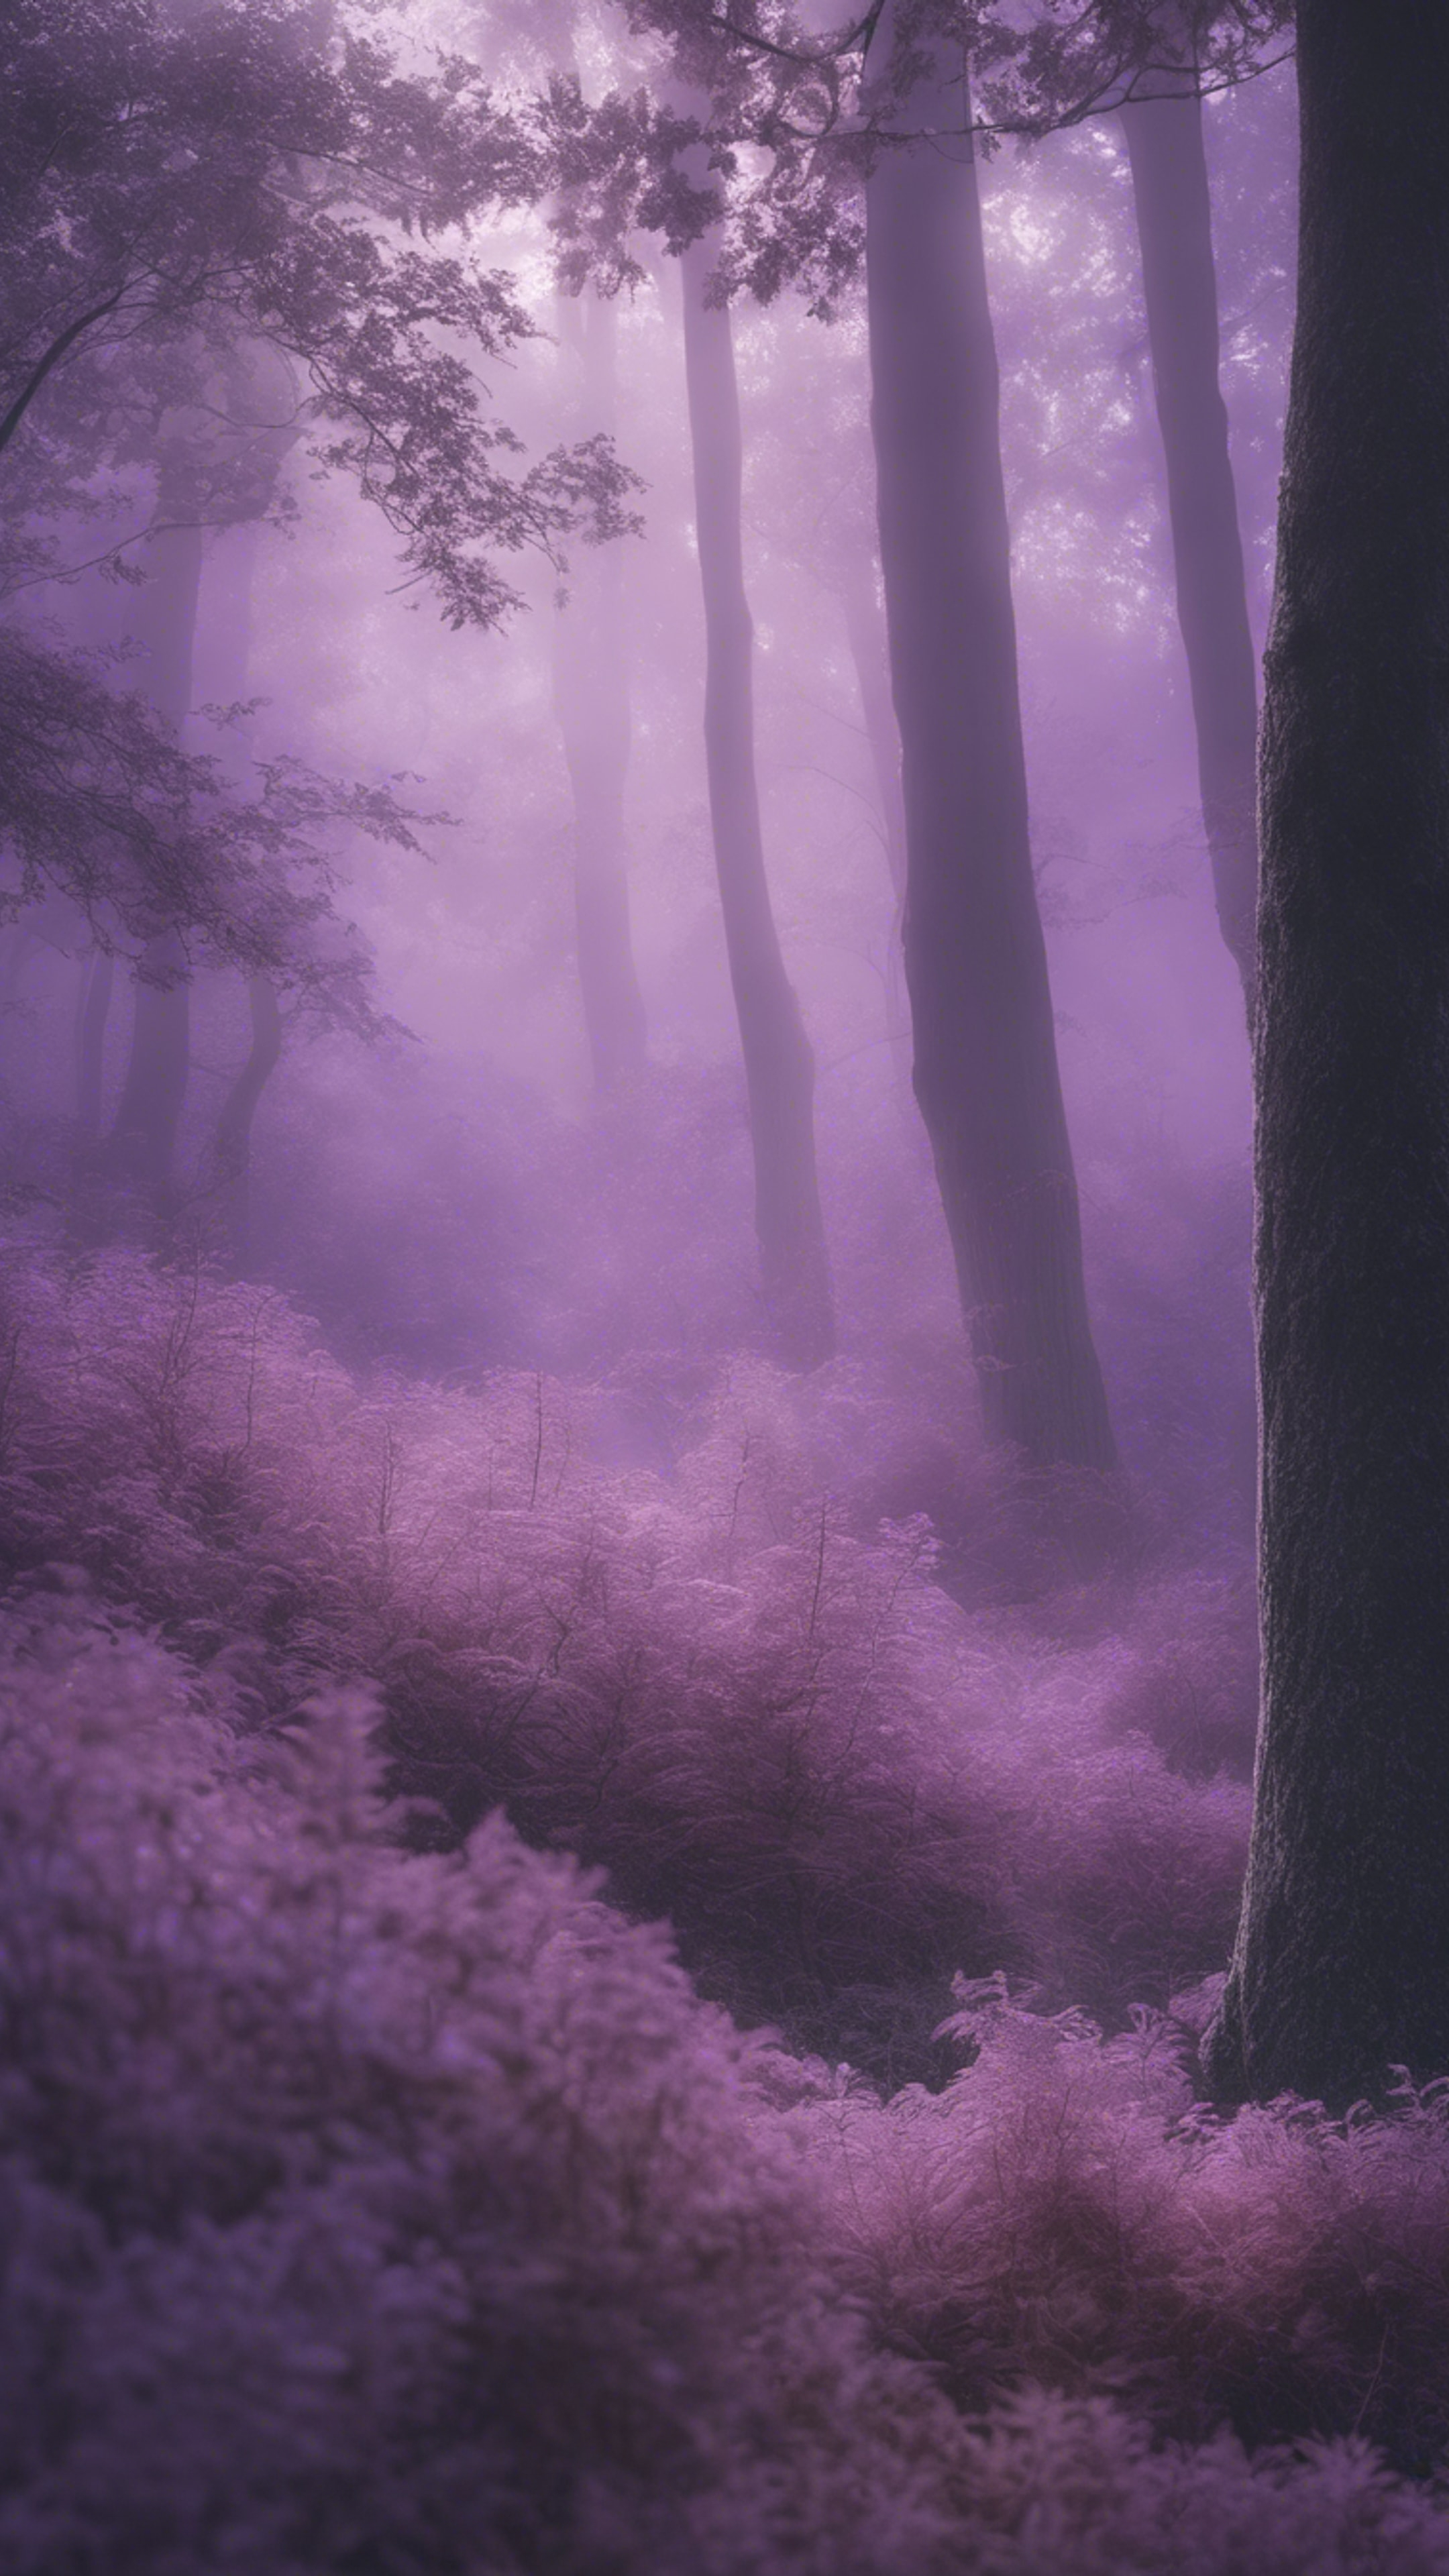 Ethereal scene of a tranquil forest bowed under a silky layer of light purple fog. Тапет[581b7126aa2a4d368dd8]